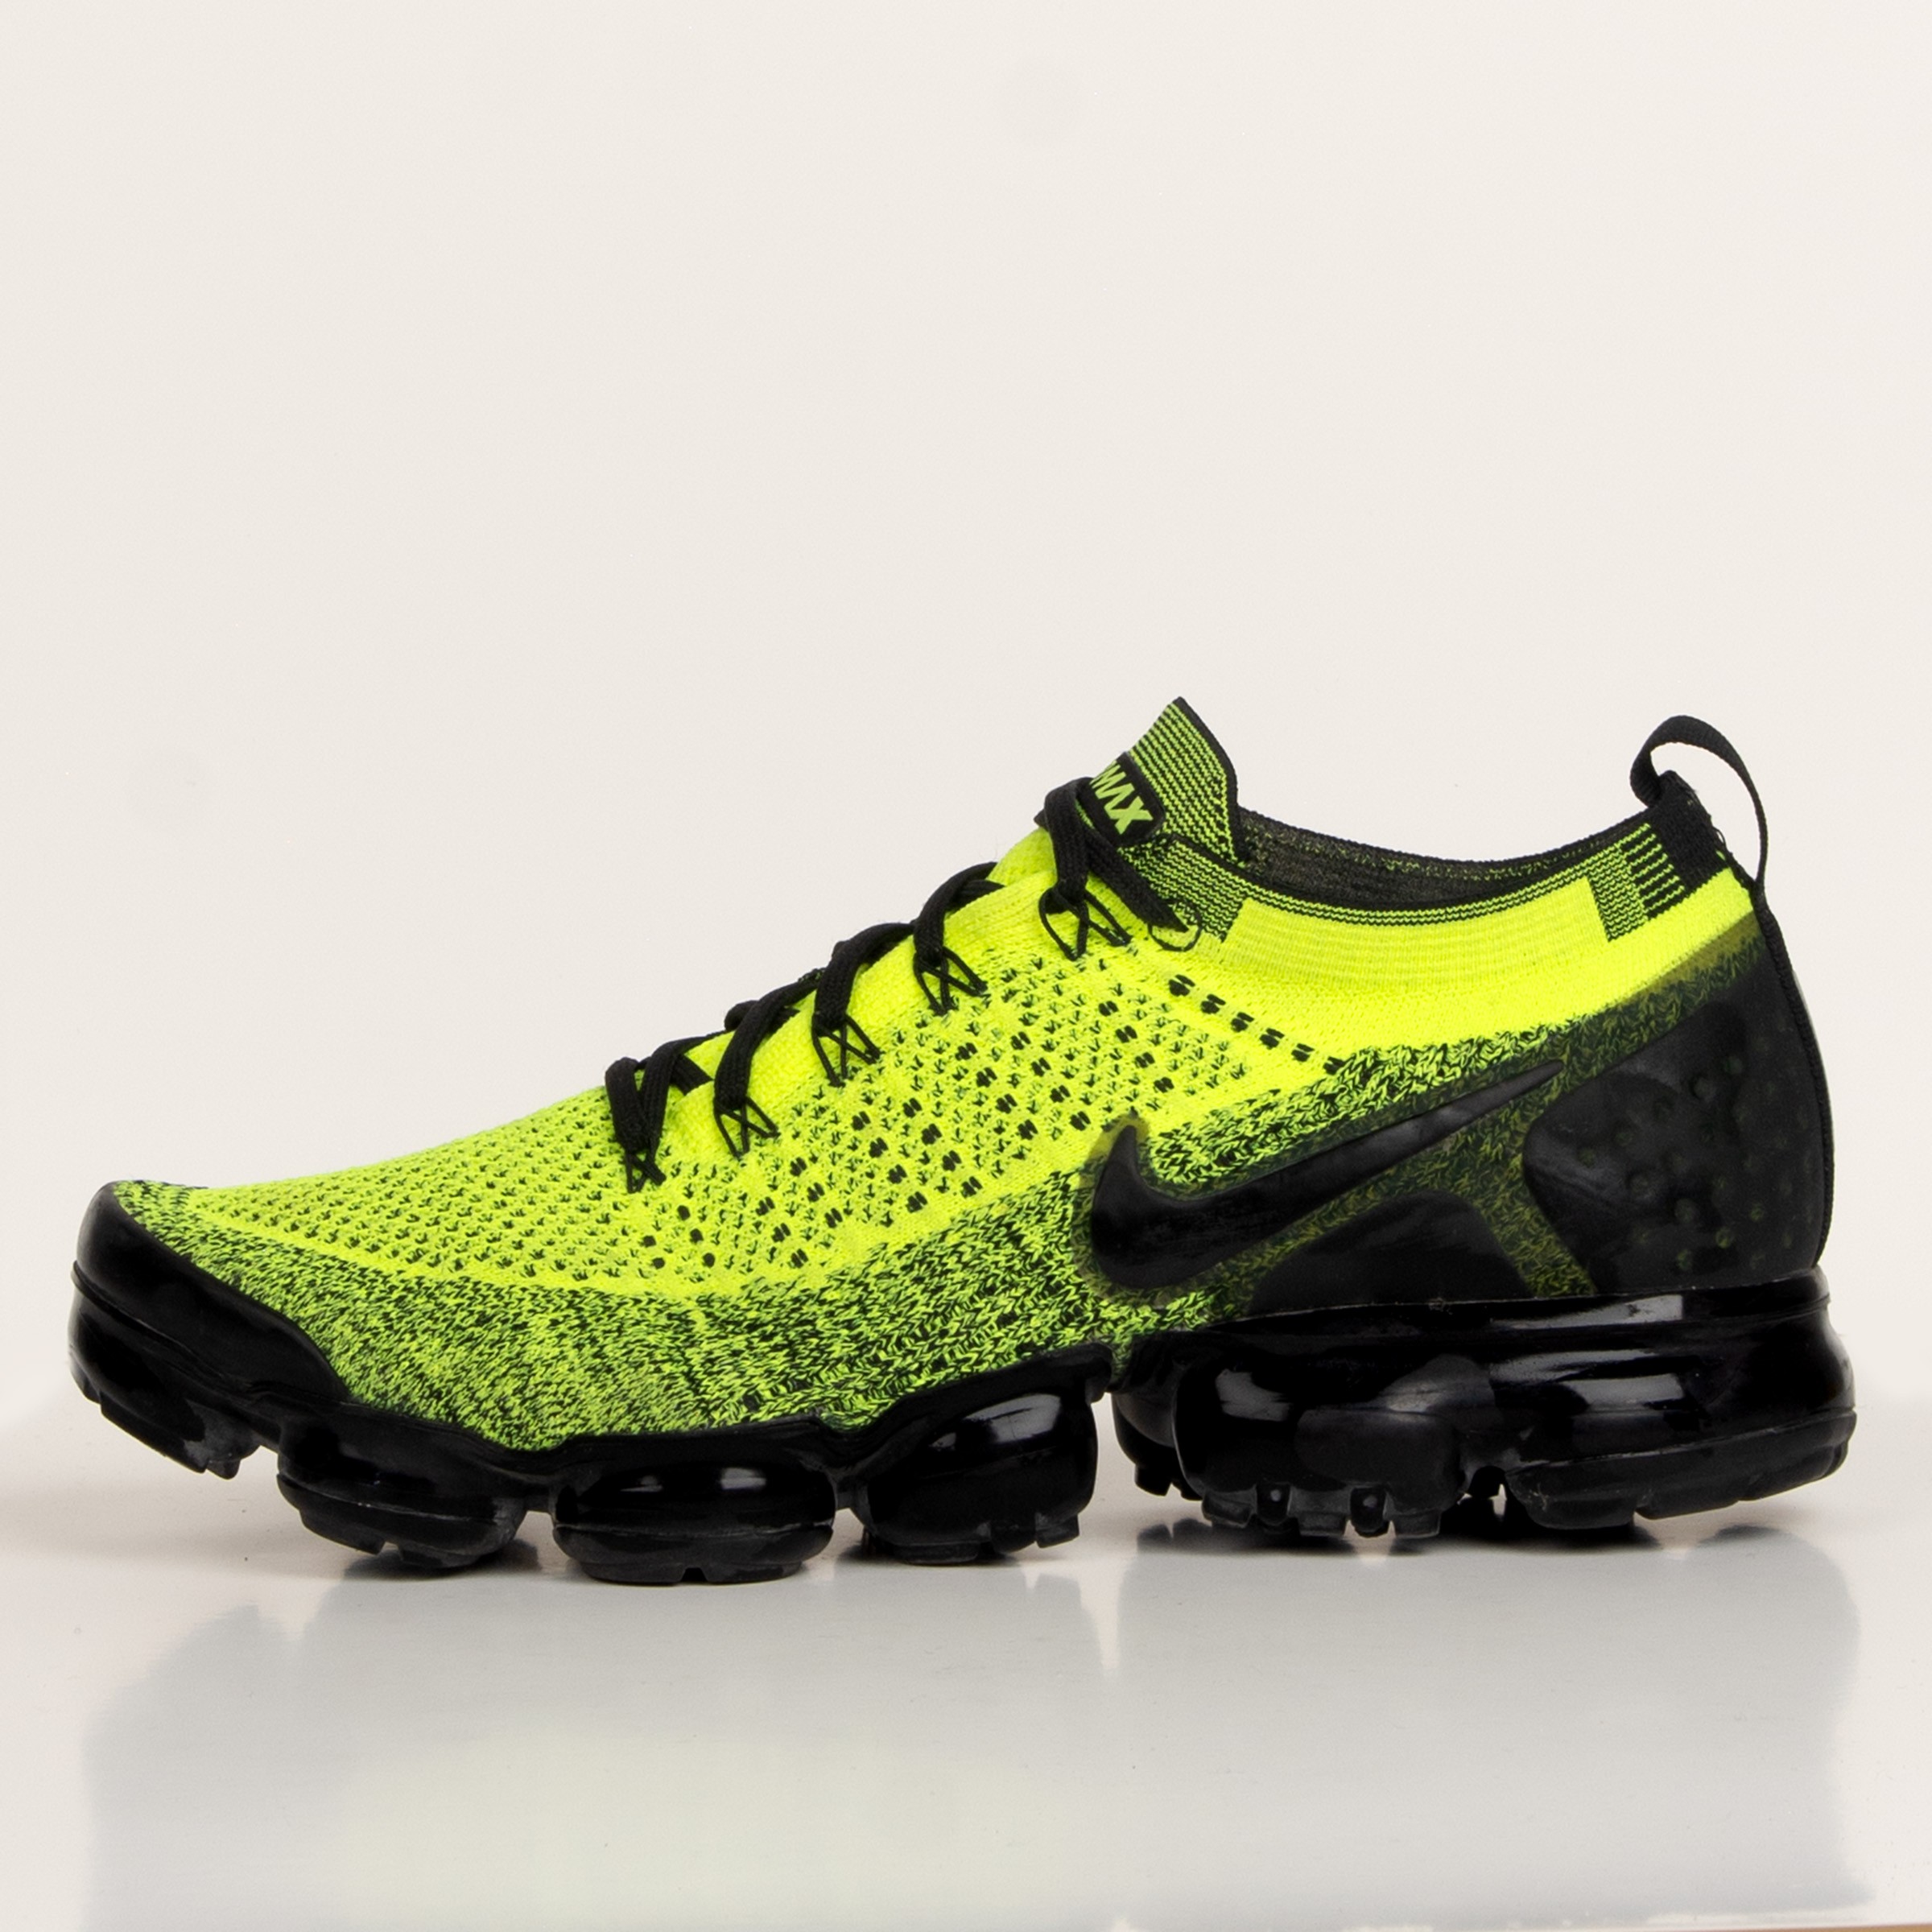 RE-POCKETS NIKE TRAINERS VAPORMAX BUBBLE SOLE YELLOW/BLACK